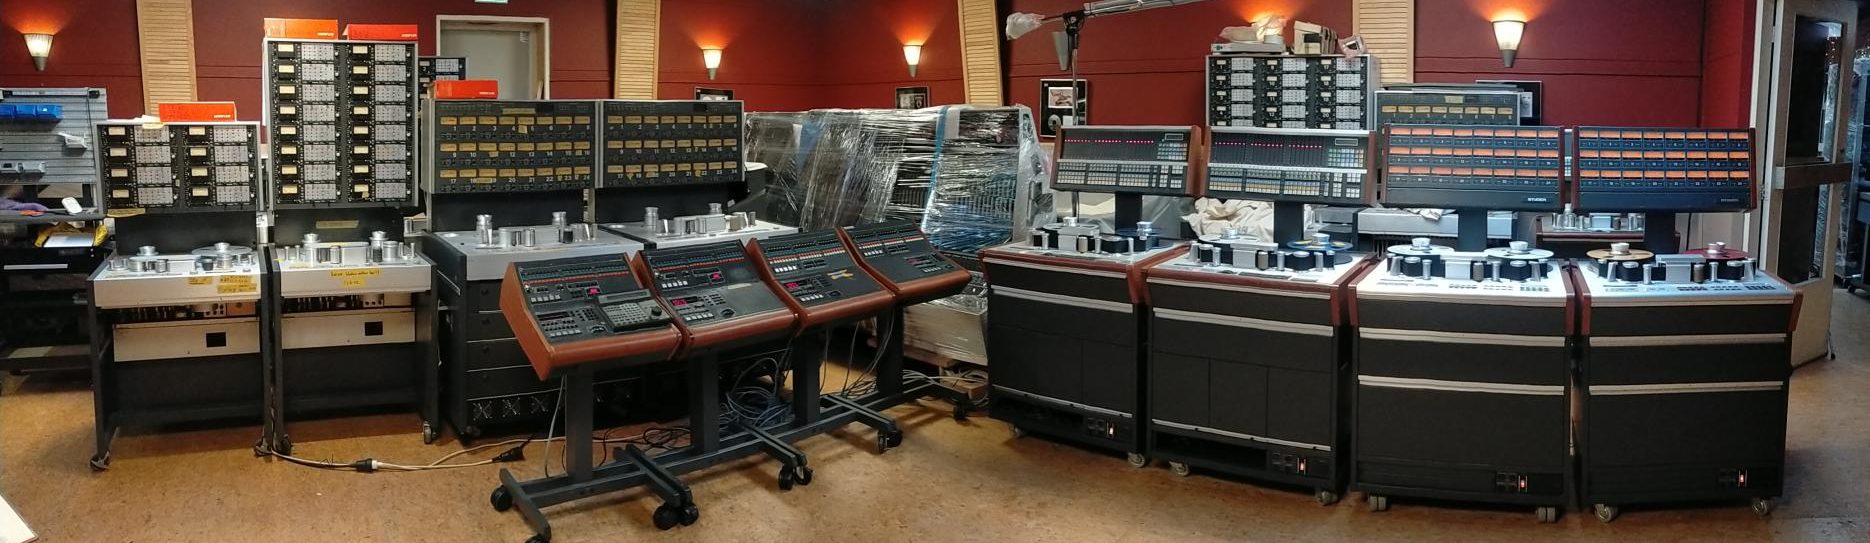 Four synced Studer taperecorders